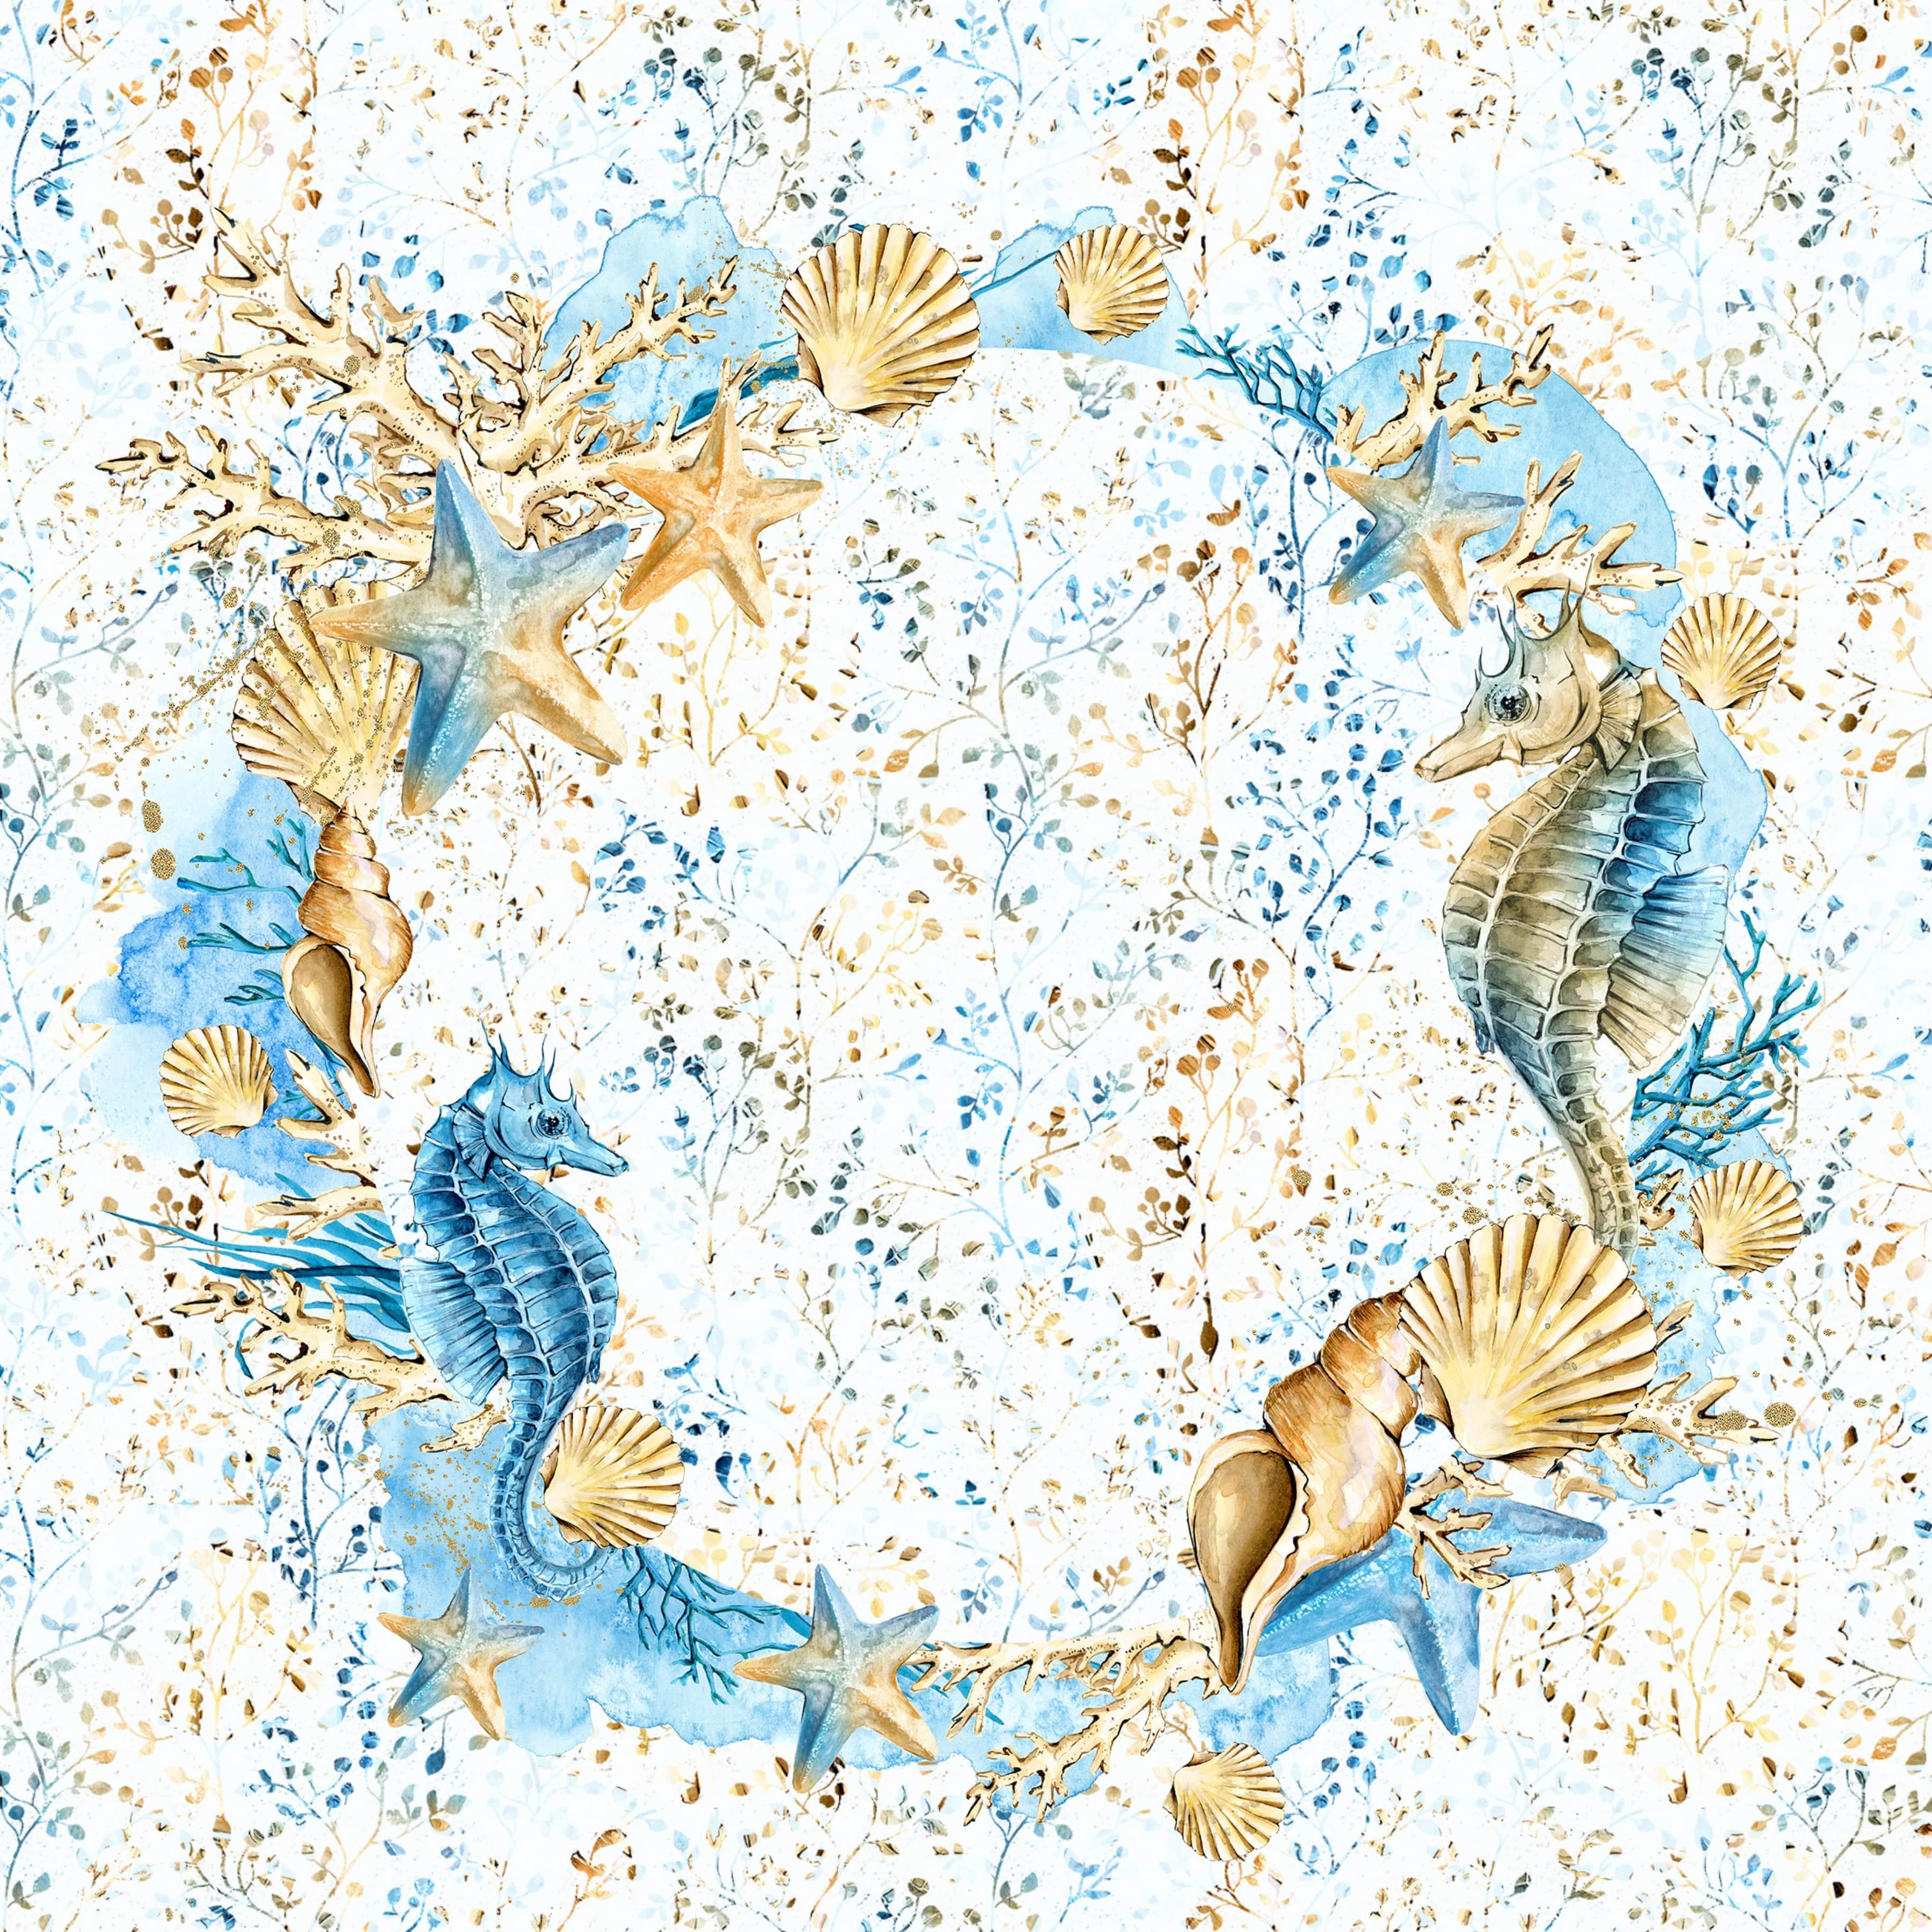 Frou Frou's Sun & Sand Collection Ocean Life 12 x 12 Double-Sided Scrapbook Paper by SSC Designs - Scrapbook Supply Companies